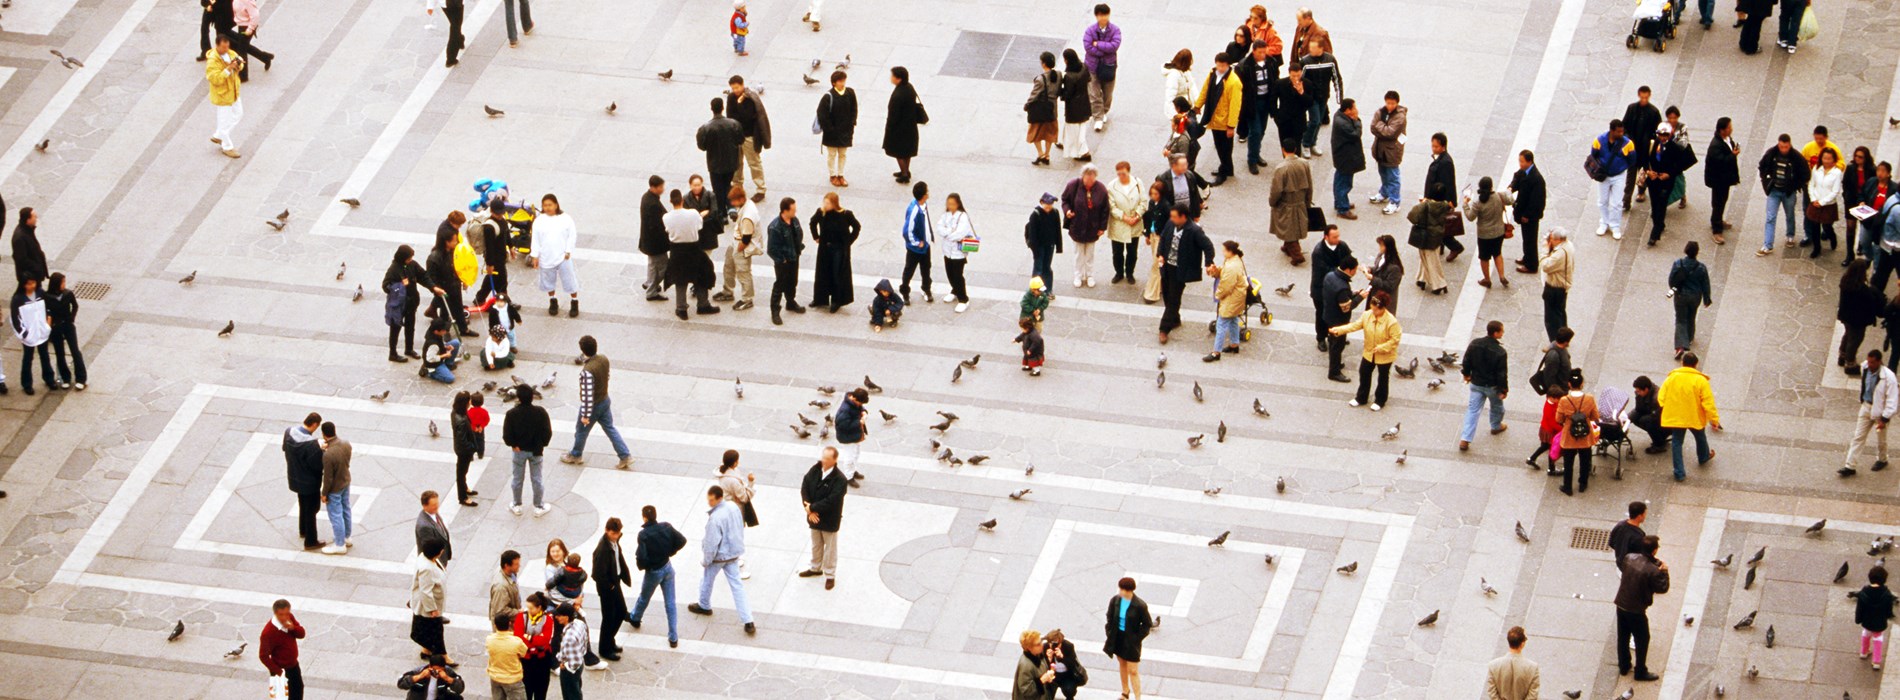 Elevated view of people walking in a square